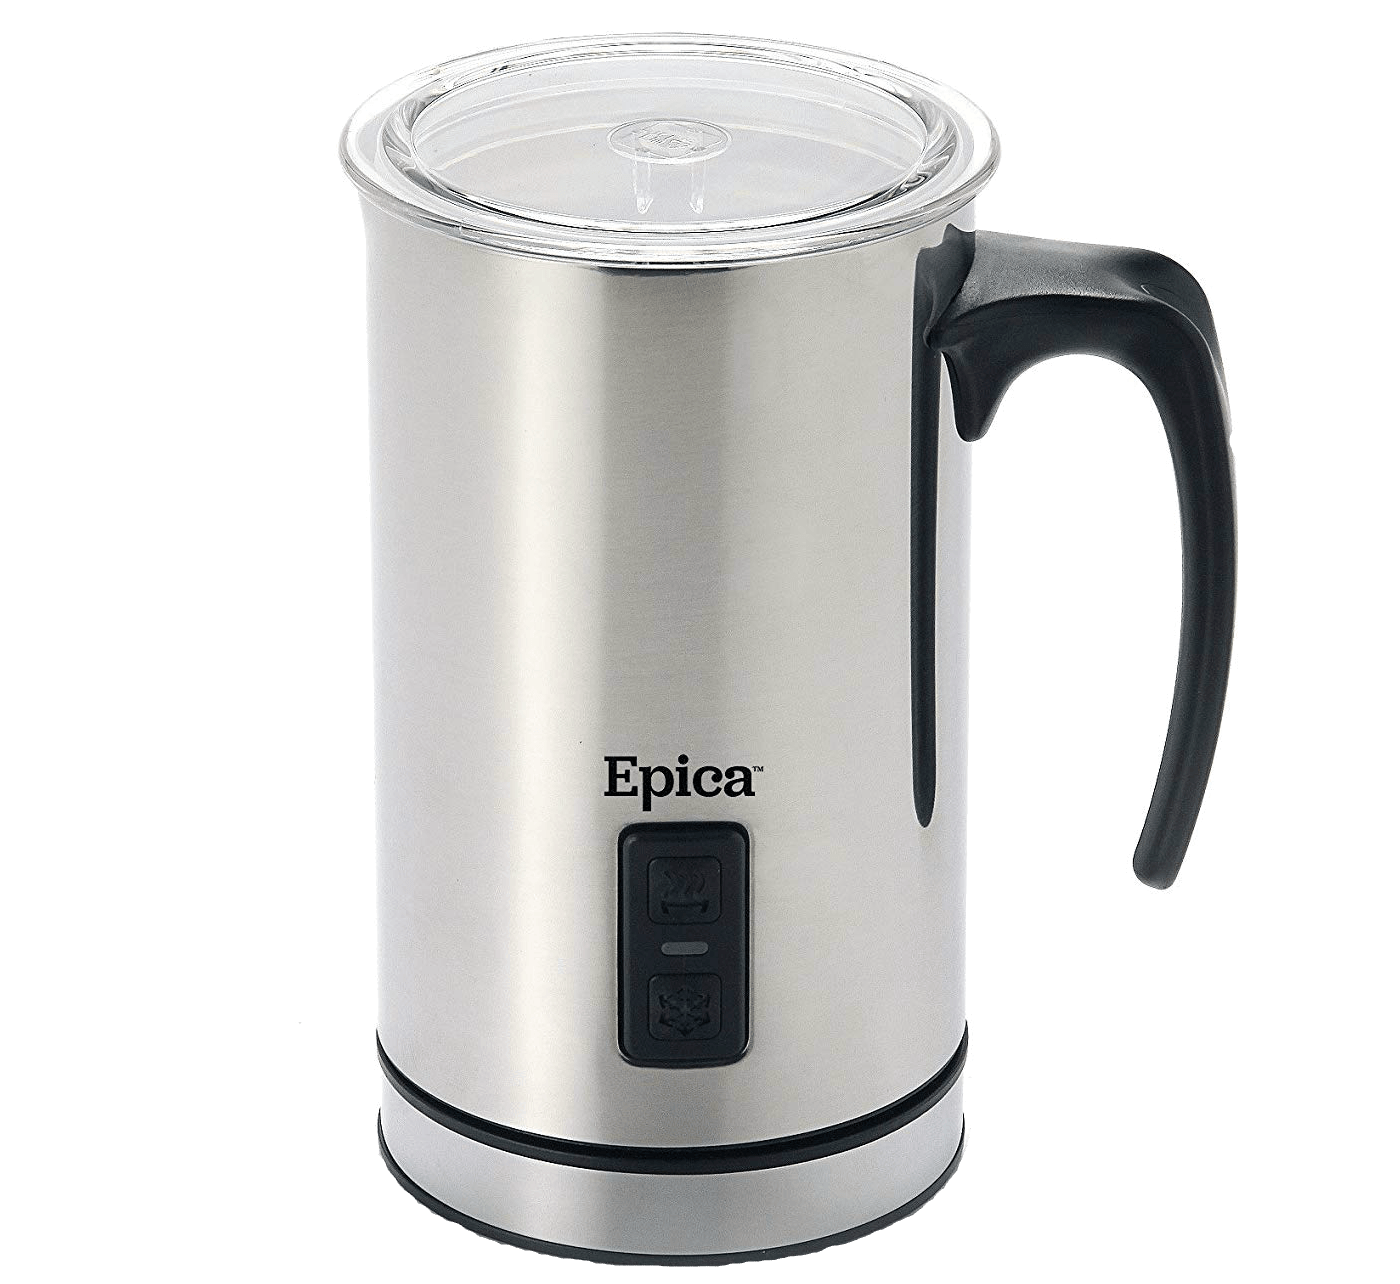 Epica milk frother review